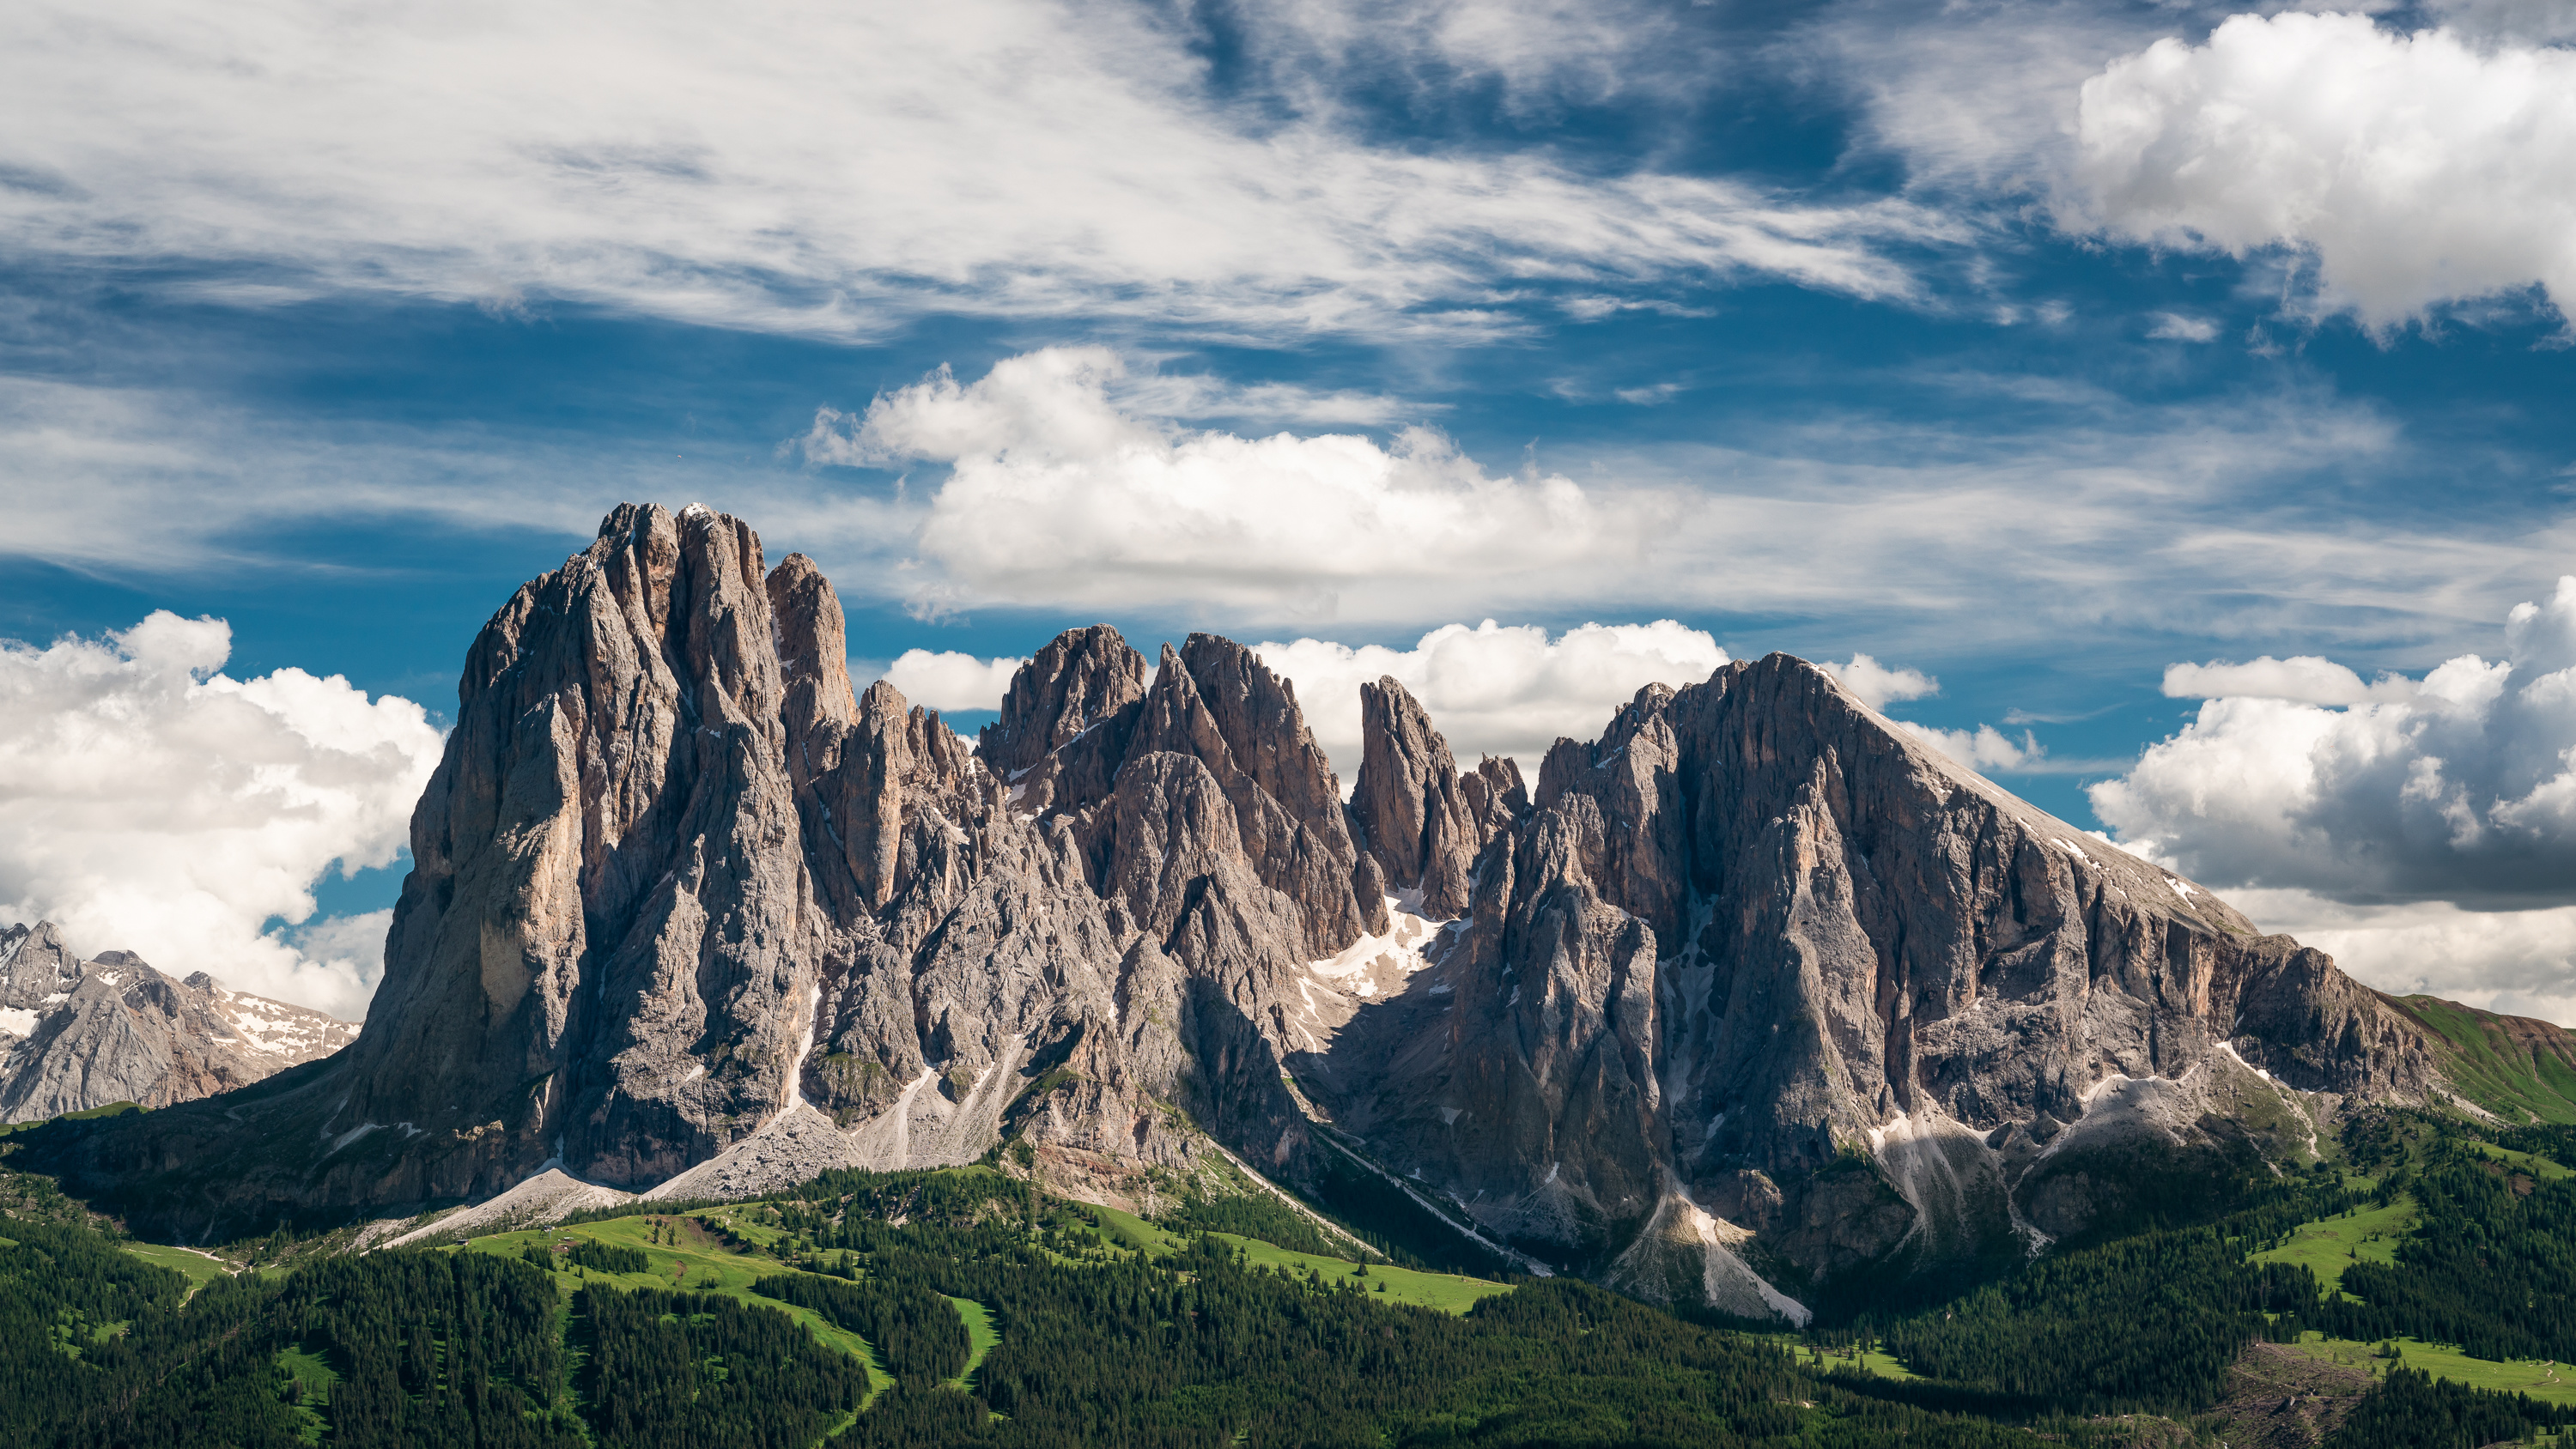 Nature Landscape Mountains Italy Alps Dolomite Alps Clouds 3000x1688